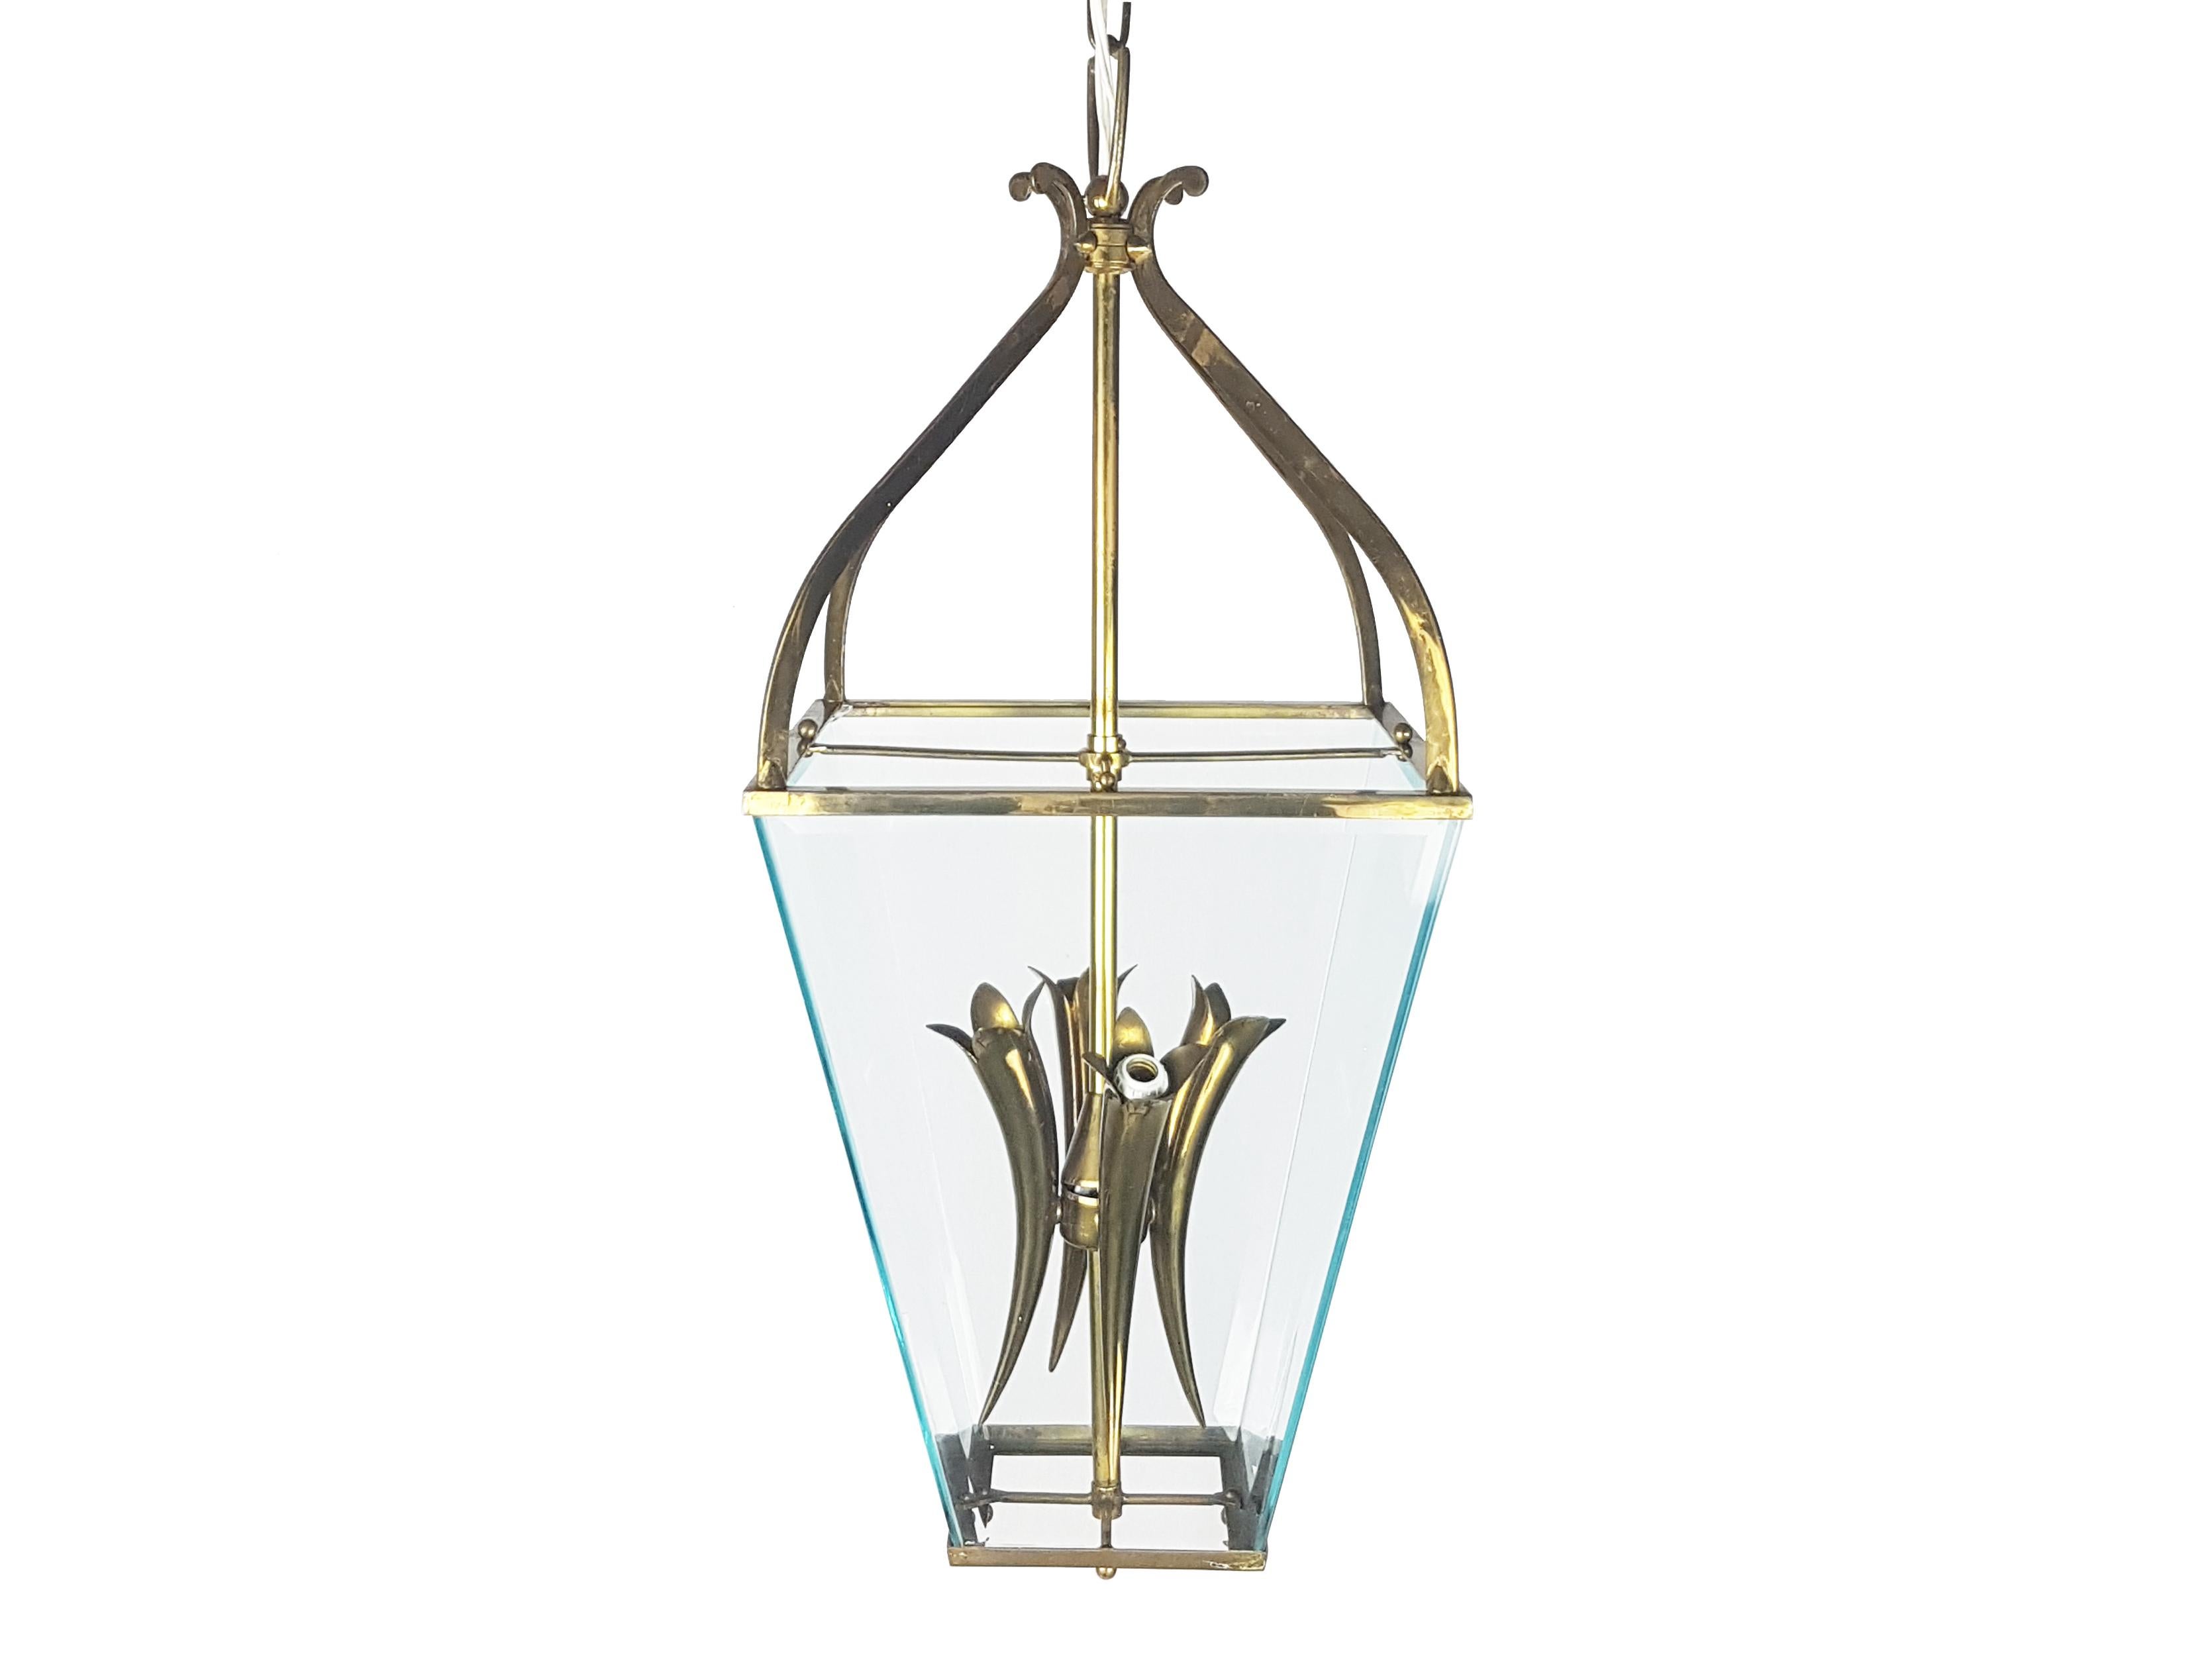 Large lantern pendant lamp produced in Italy between the 1940s and 1950s.
Its design is reminiscent of similar products made by well-known designers such as Paolo Buffa, Guglielmo Ulrich and Pietro Chiesa.
Brass structure with 4 faceted glass